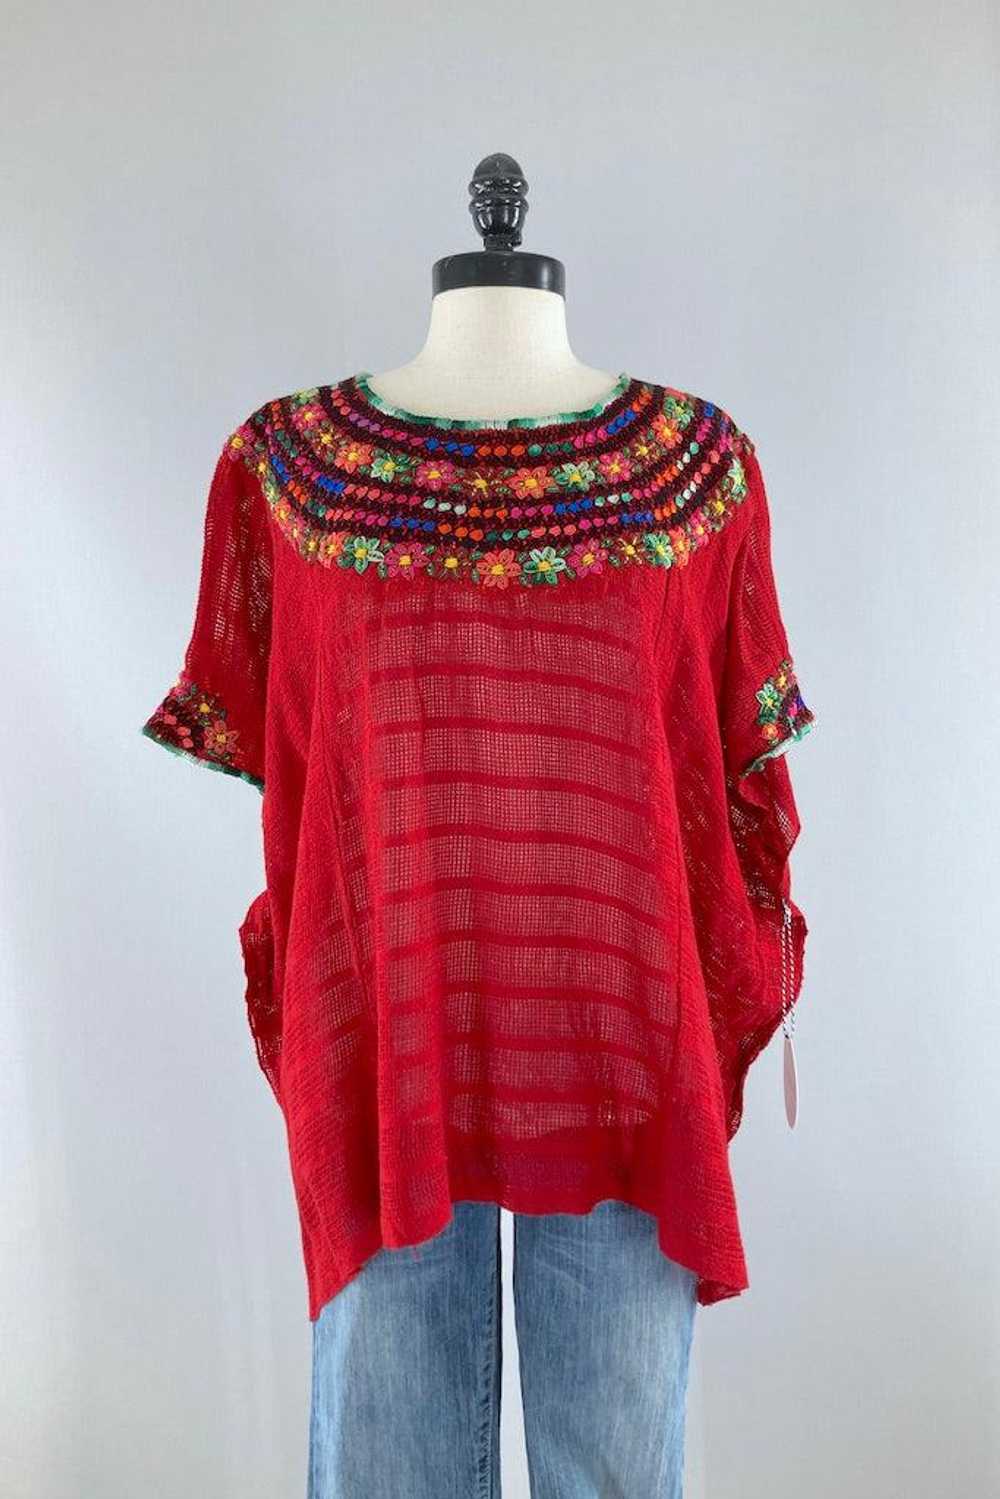 Vintage Embroidered Cotton Tunic - image 1